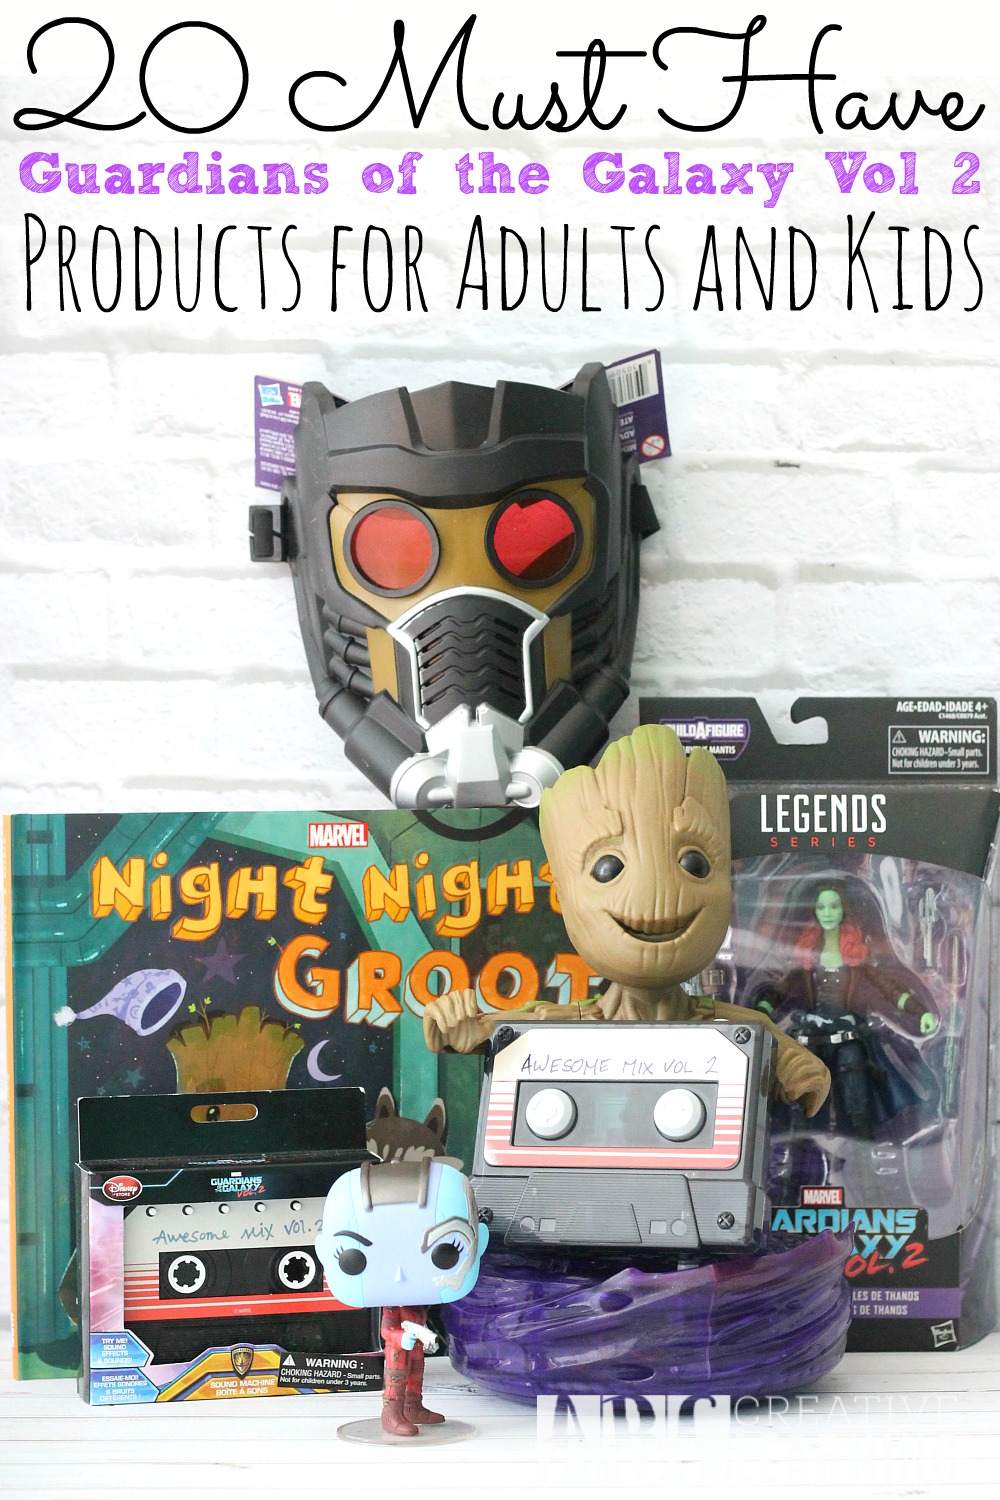 20 Must Have Guardians of the Galaxy Vol 2 Products For Adults and Kids #GotGVol2Event